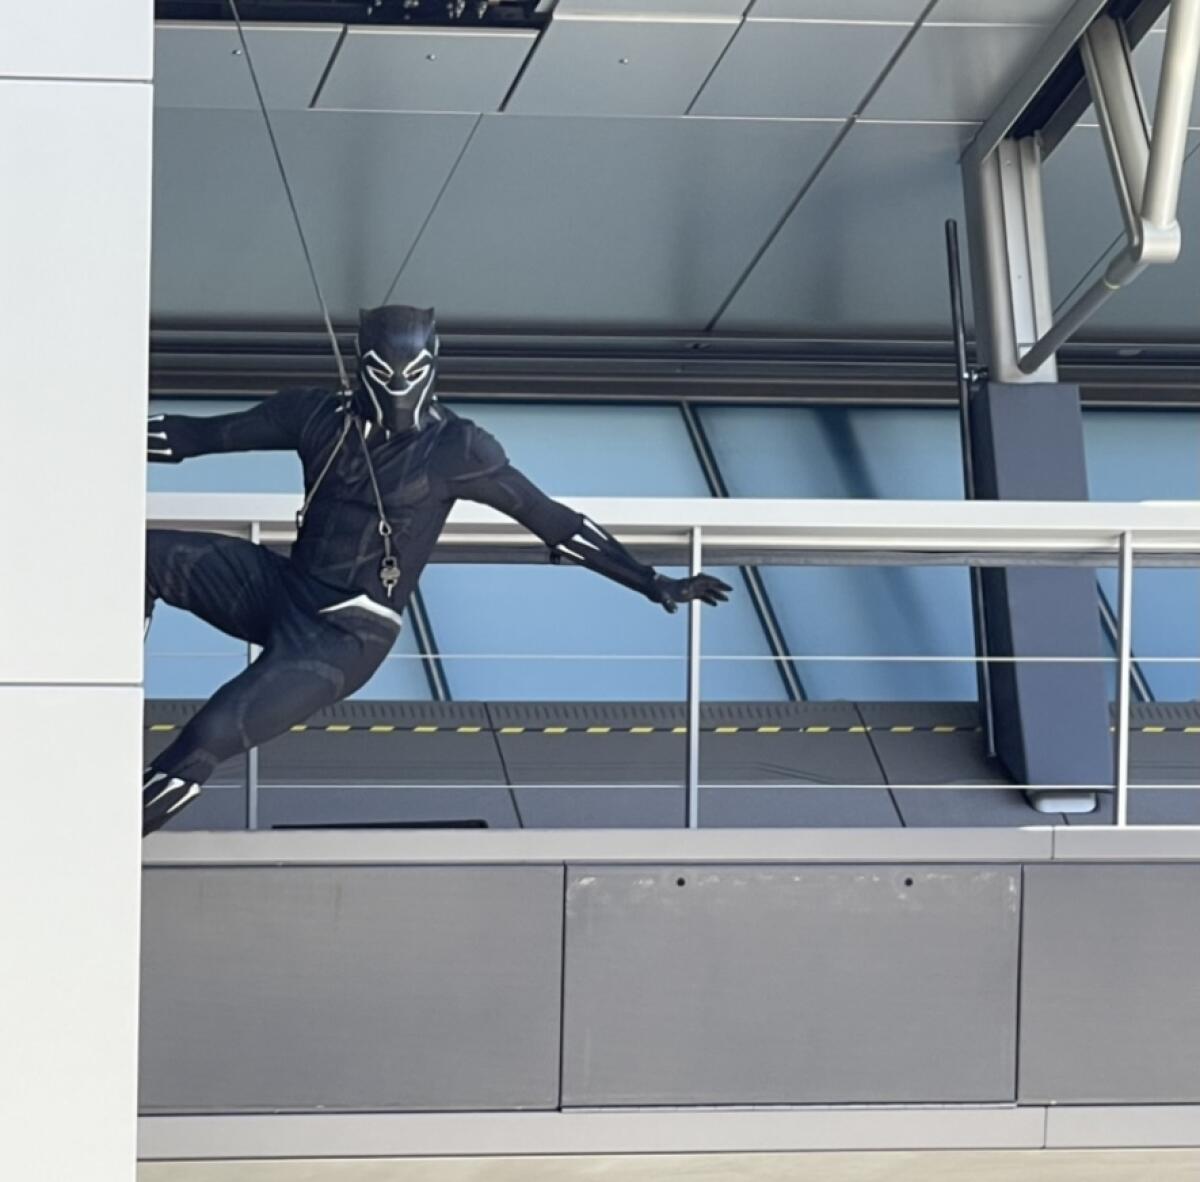 Black Panther is attached to a wire in front of a building.